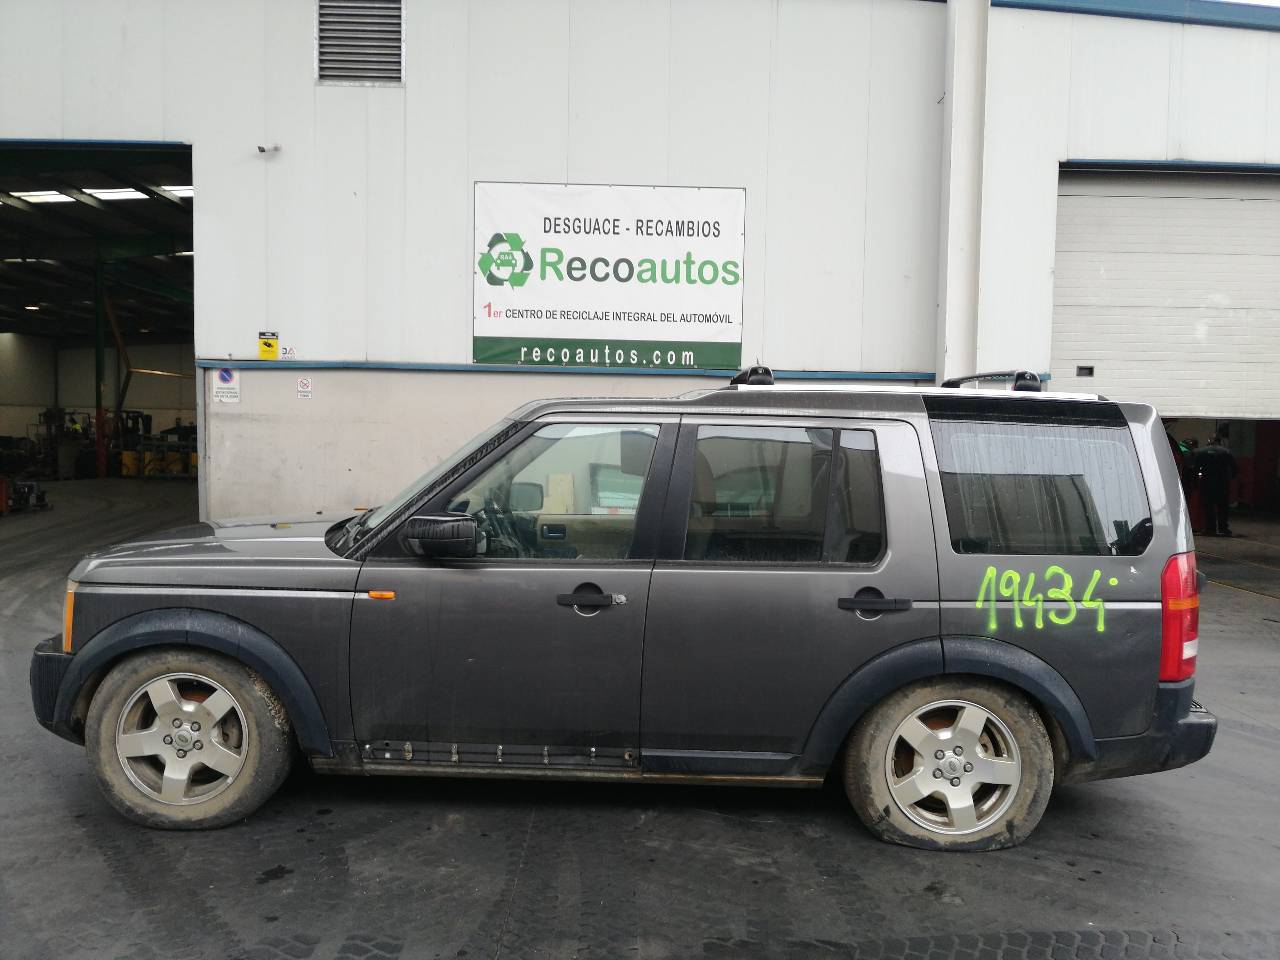 LAND ROVER Discovery 3 generation (2004-2009) Раздатка IAB500244, A0197838, 8452227091 24220522